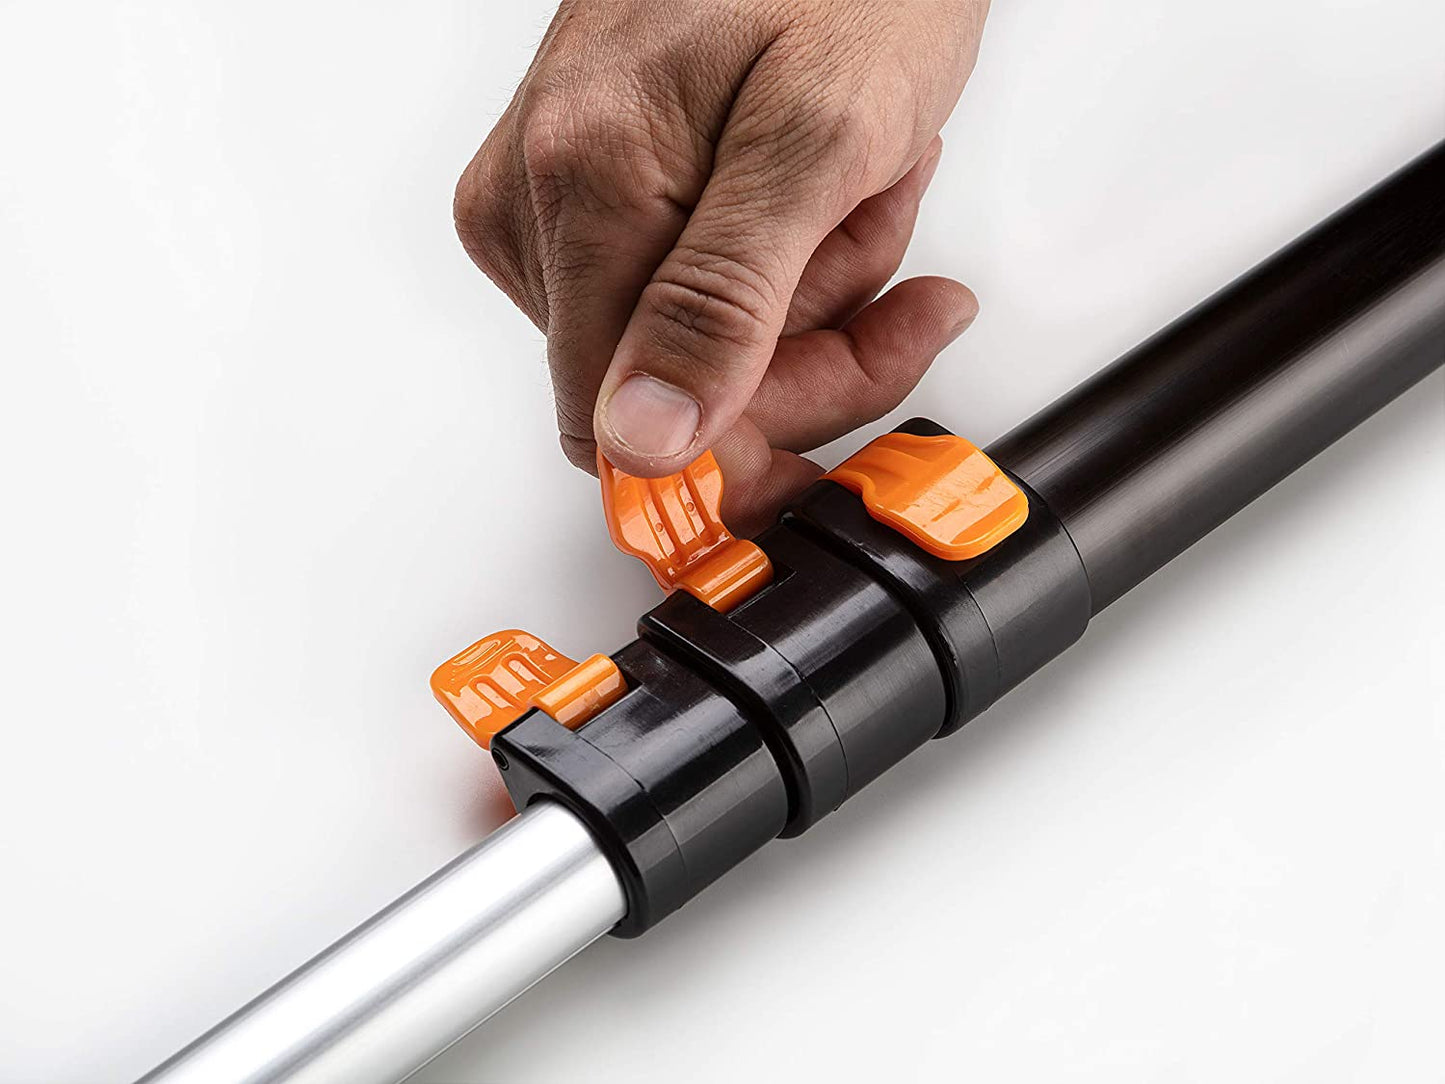 Versatile and Durable Telescopic Extension Pole - 7-30 Ft Length, Universal Metal Tip for Various Applications for Painting, Dusting, Window Cleaning